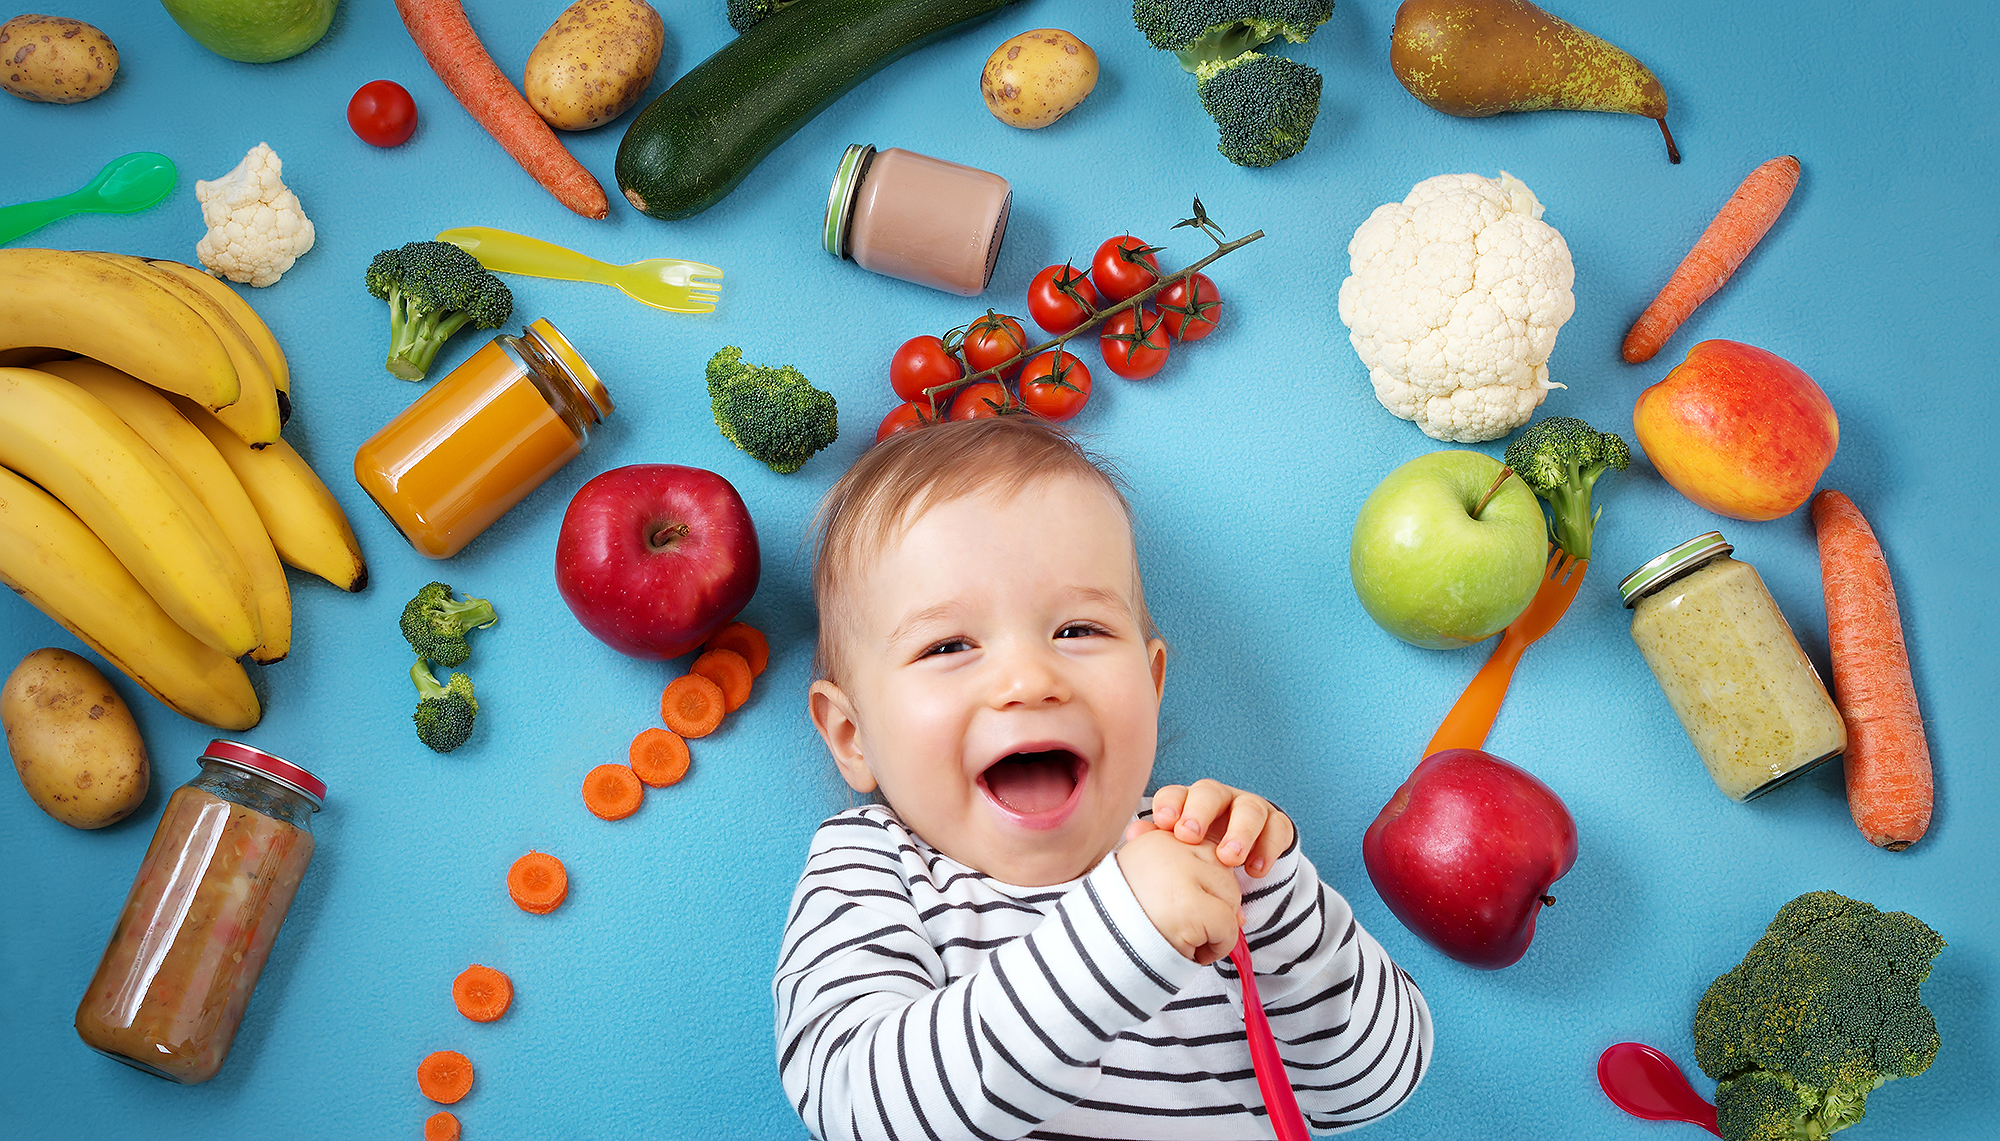 Little Spoon: Make Healthy Mealtimes a Breeze — For Babies to Big